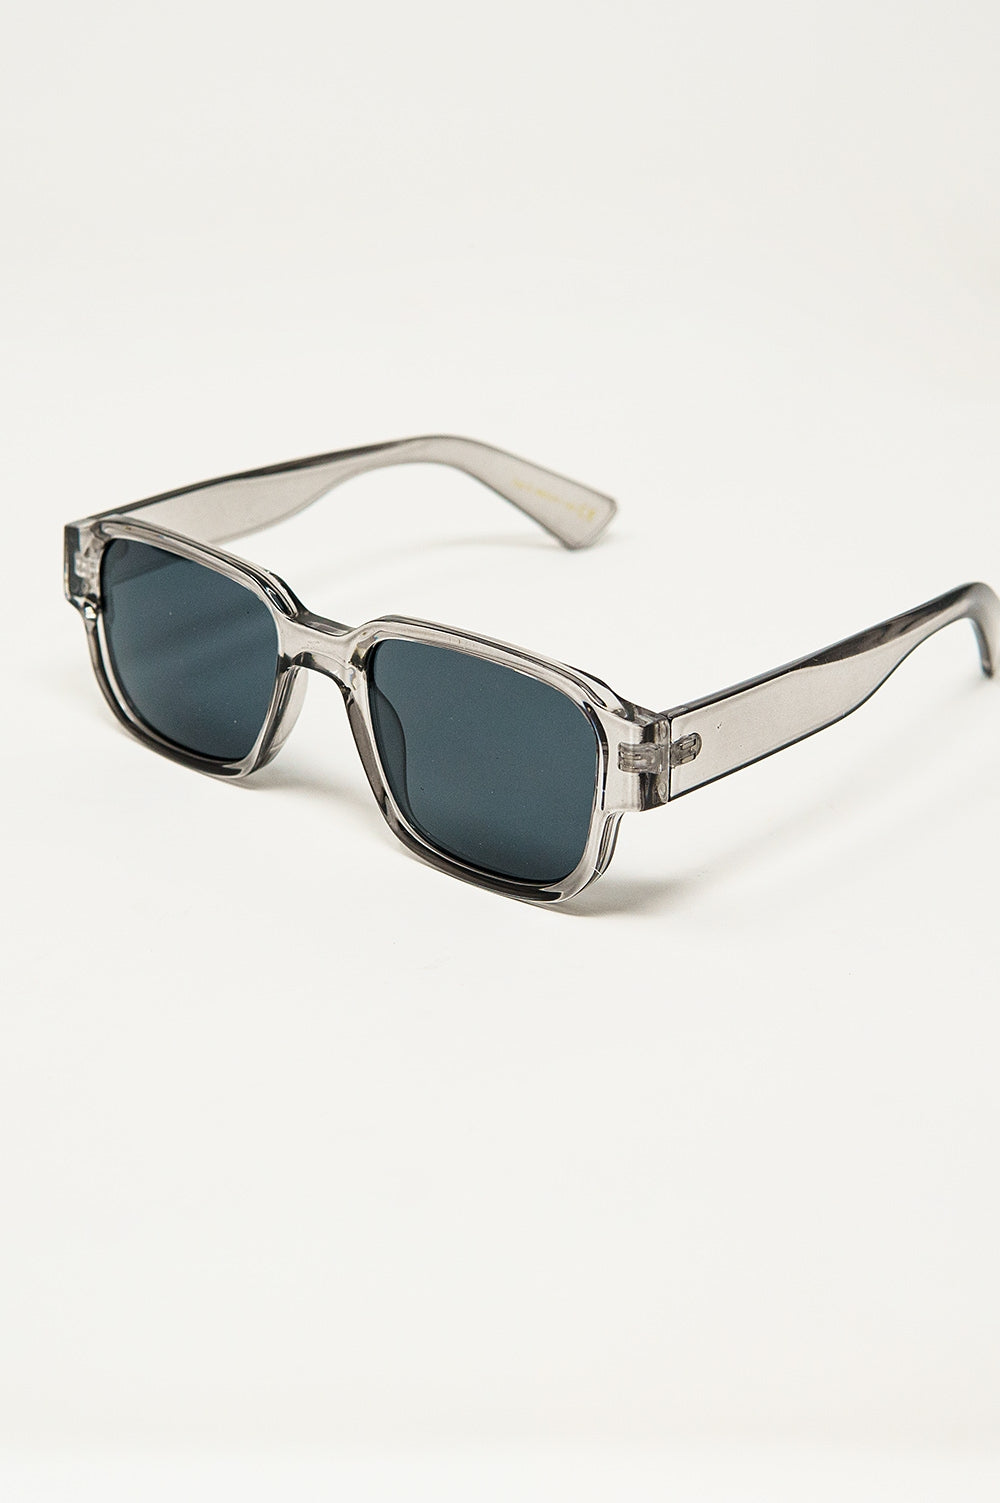 Q2 Chunky Square Sunglasses In Crystal Grey